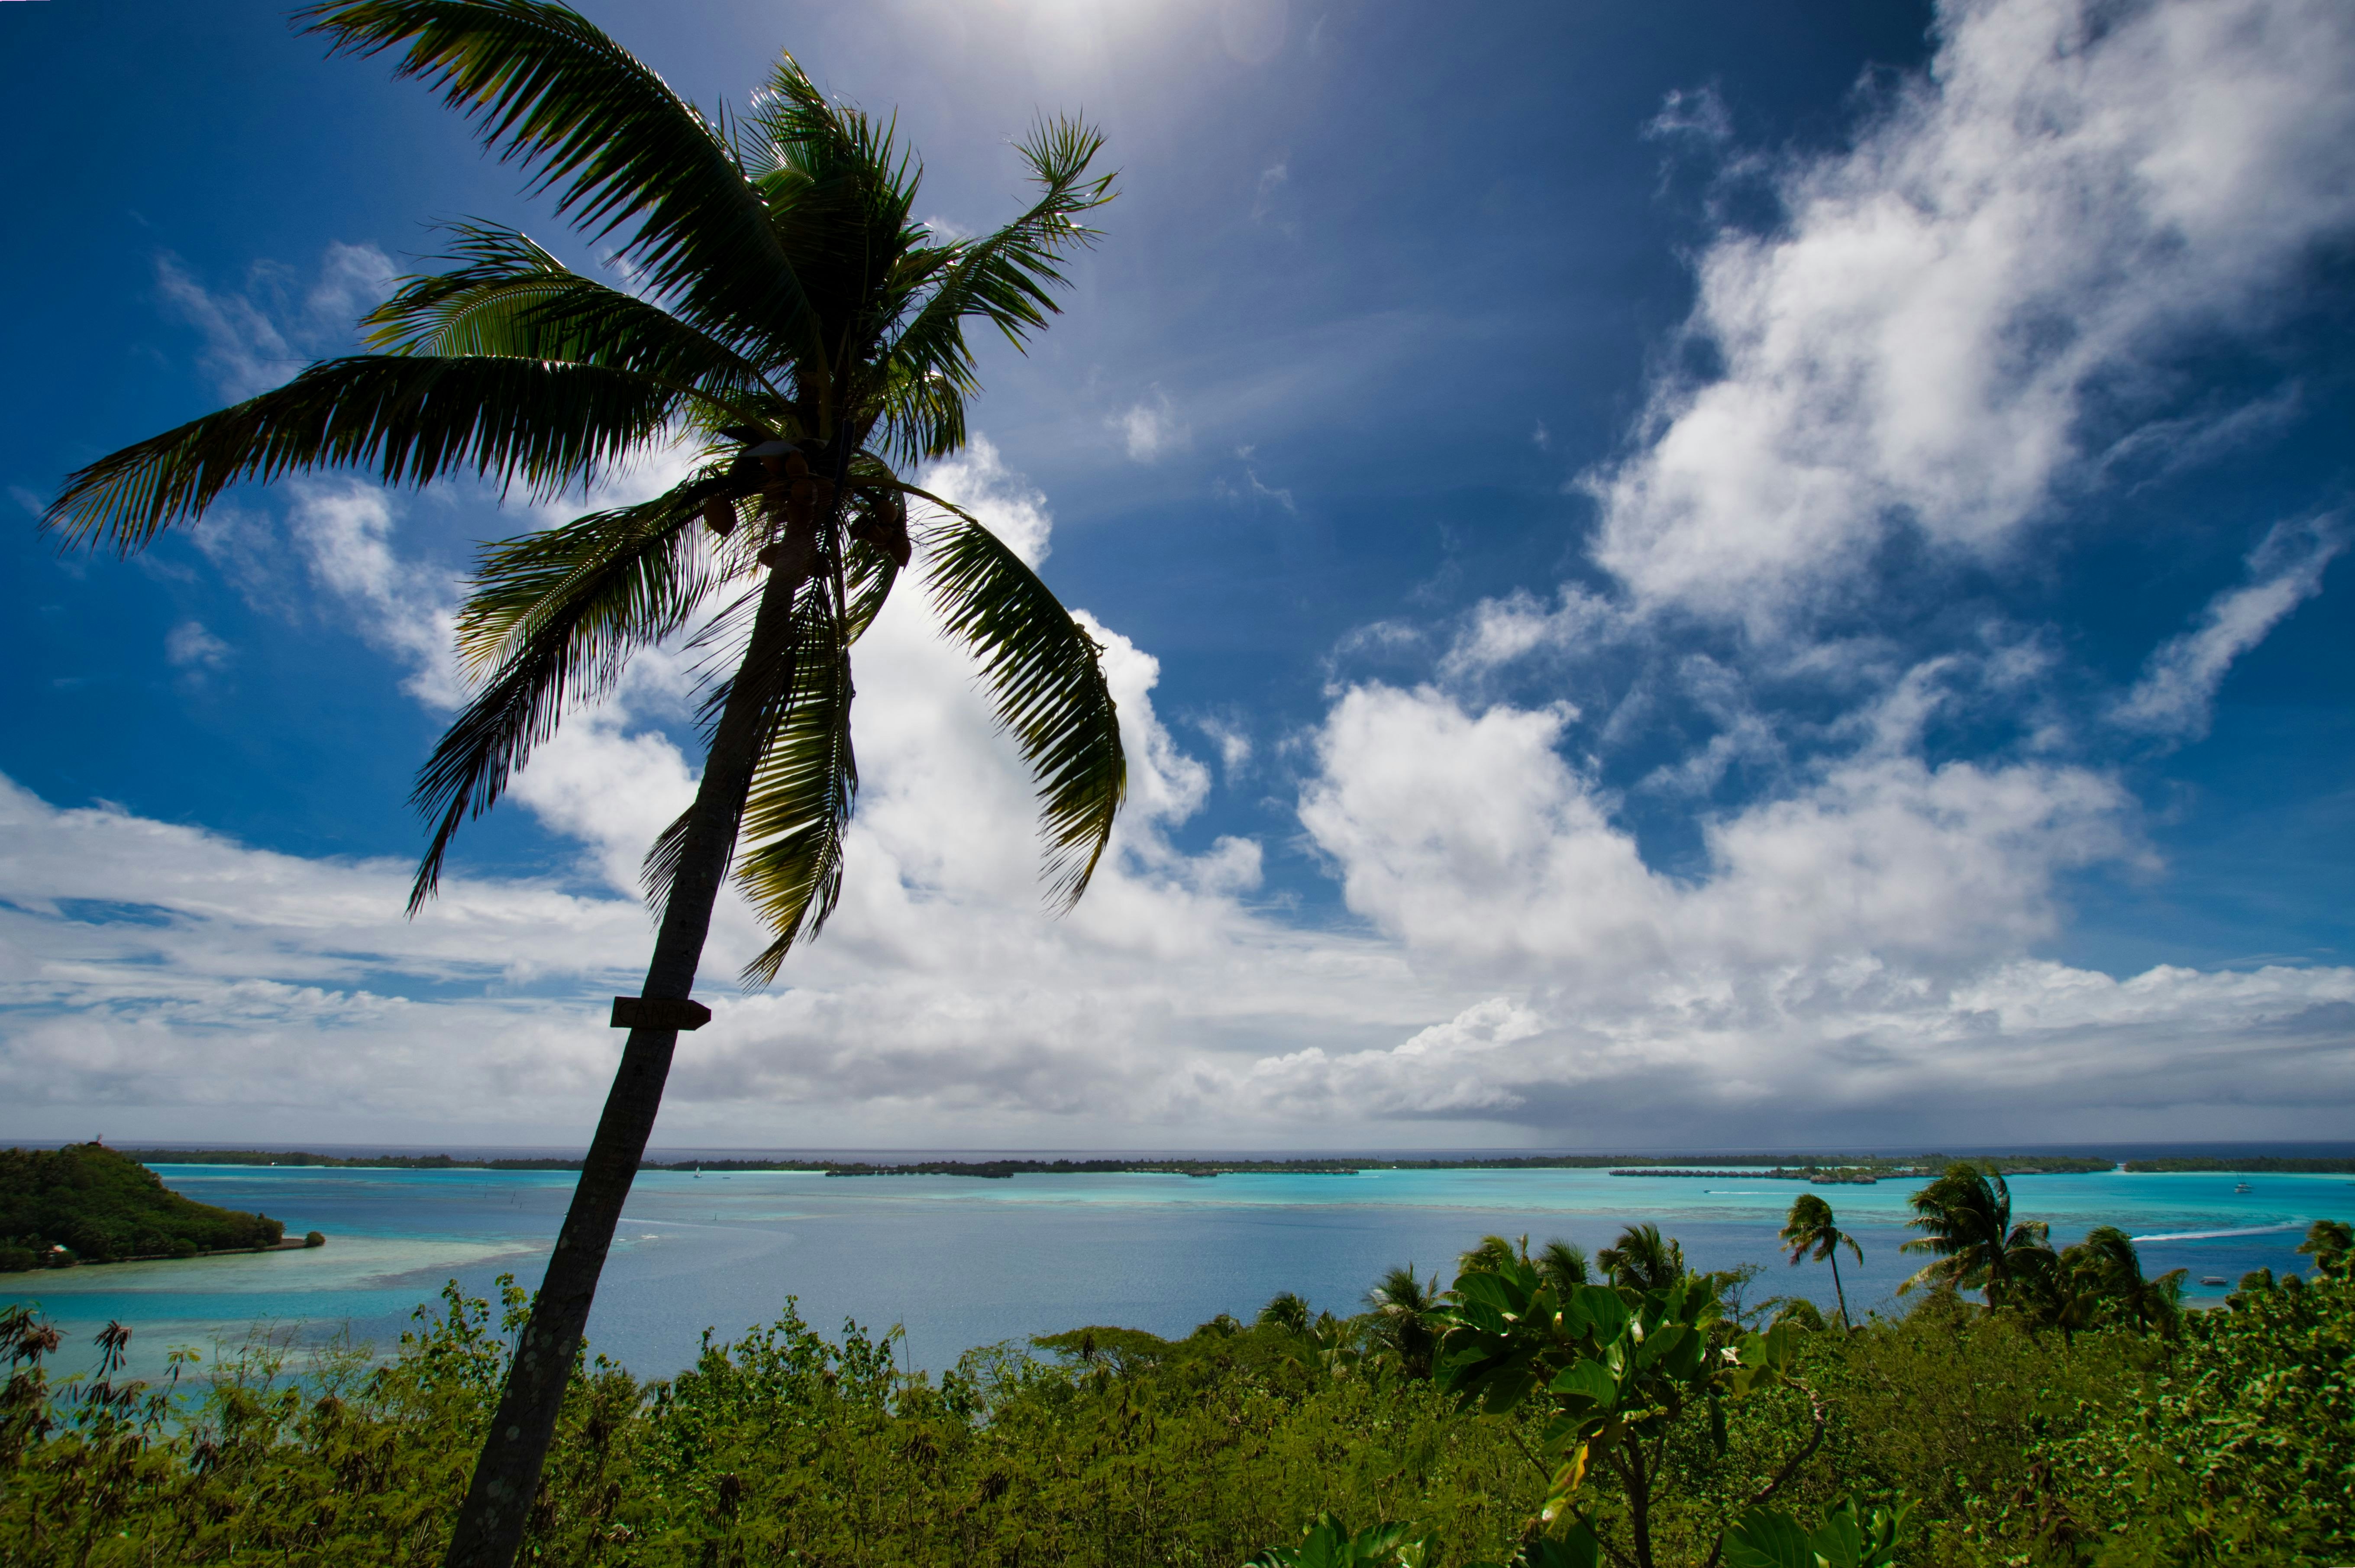 green palm tree near sea under blue sky and white clouds during daytime